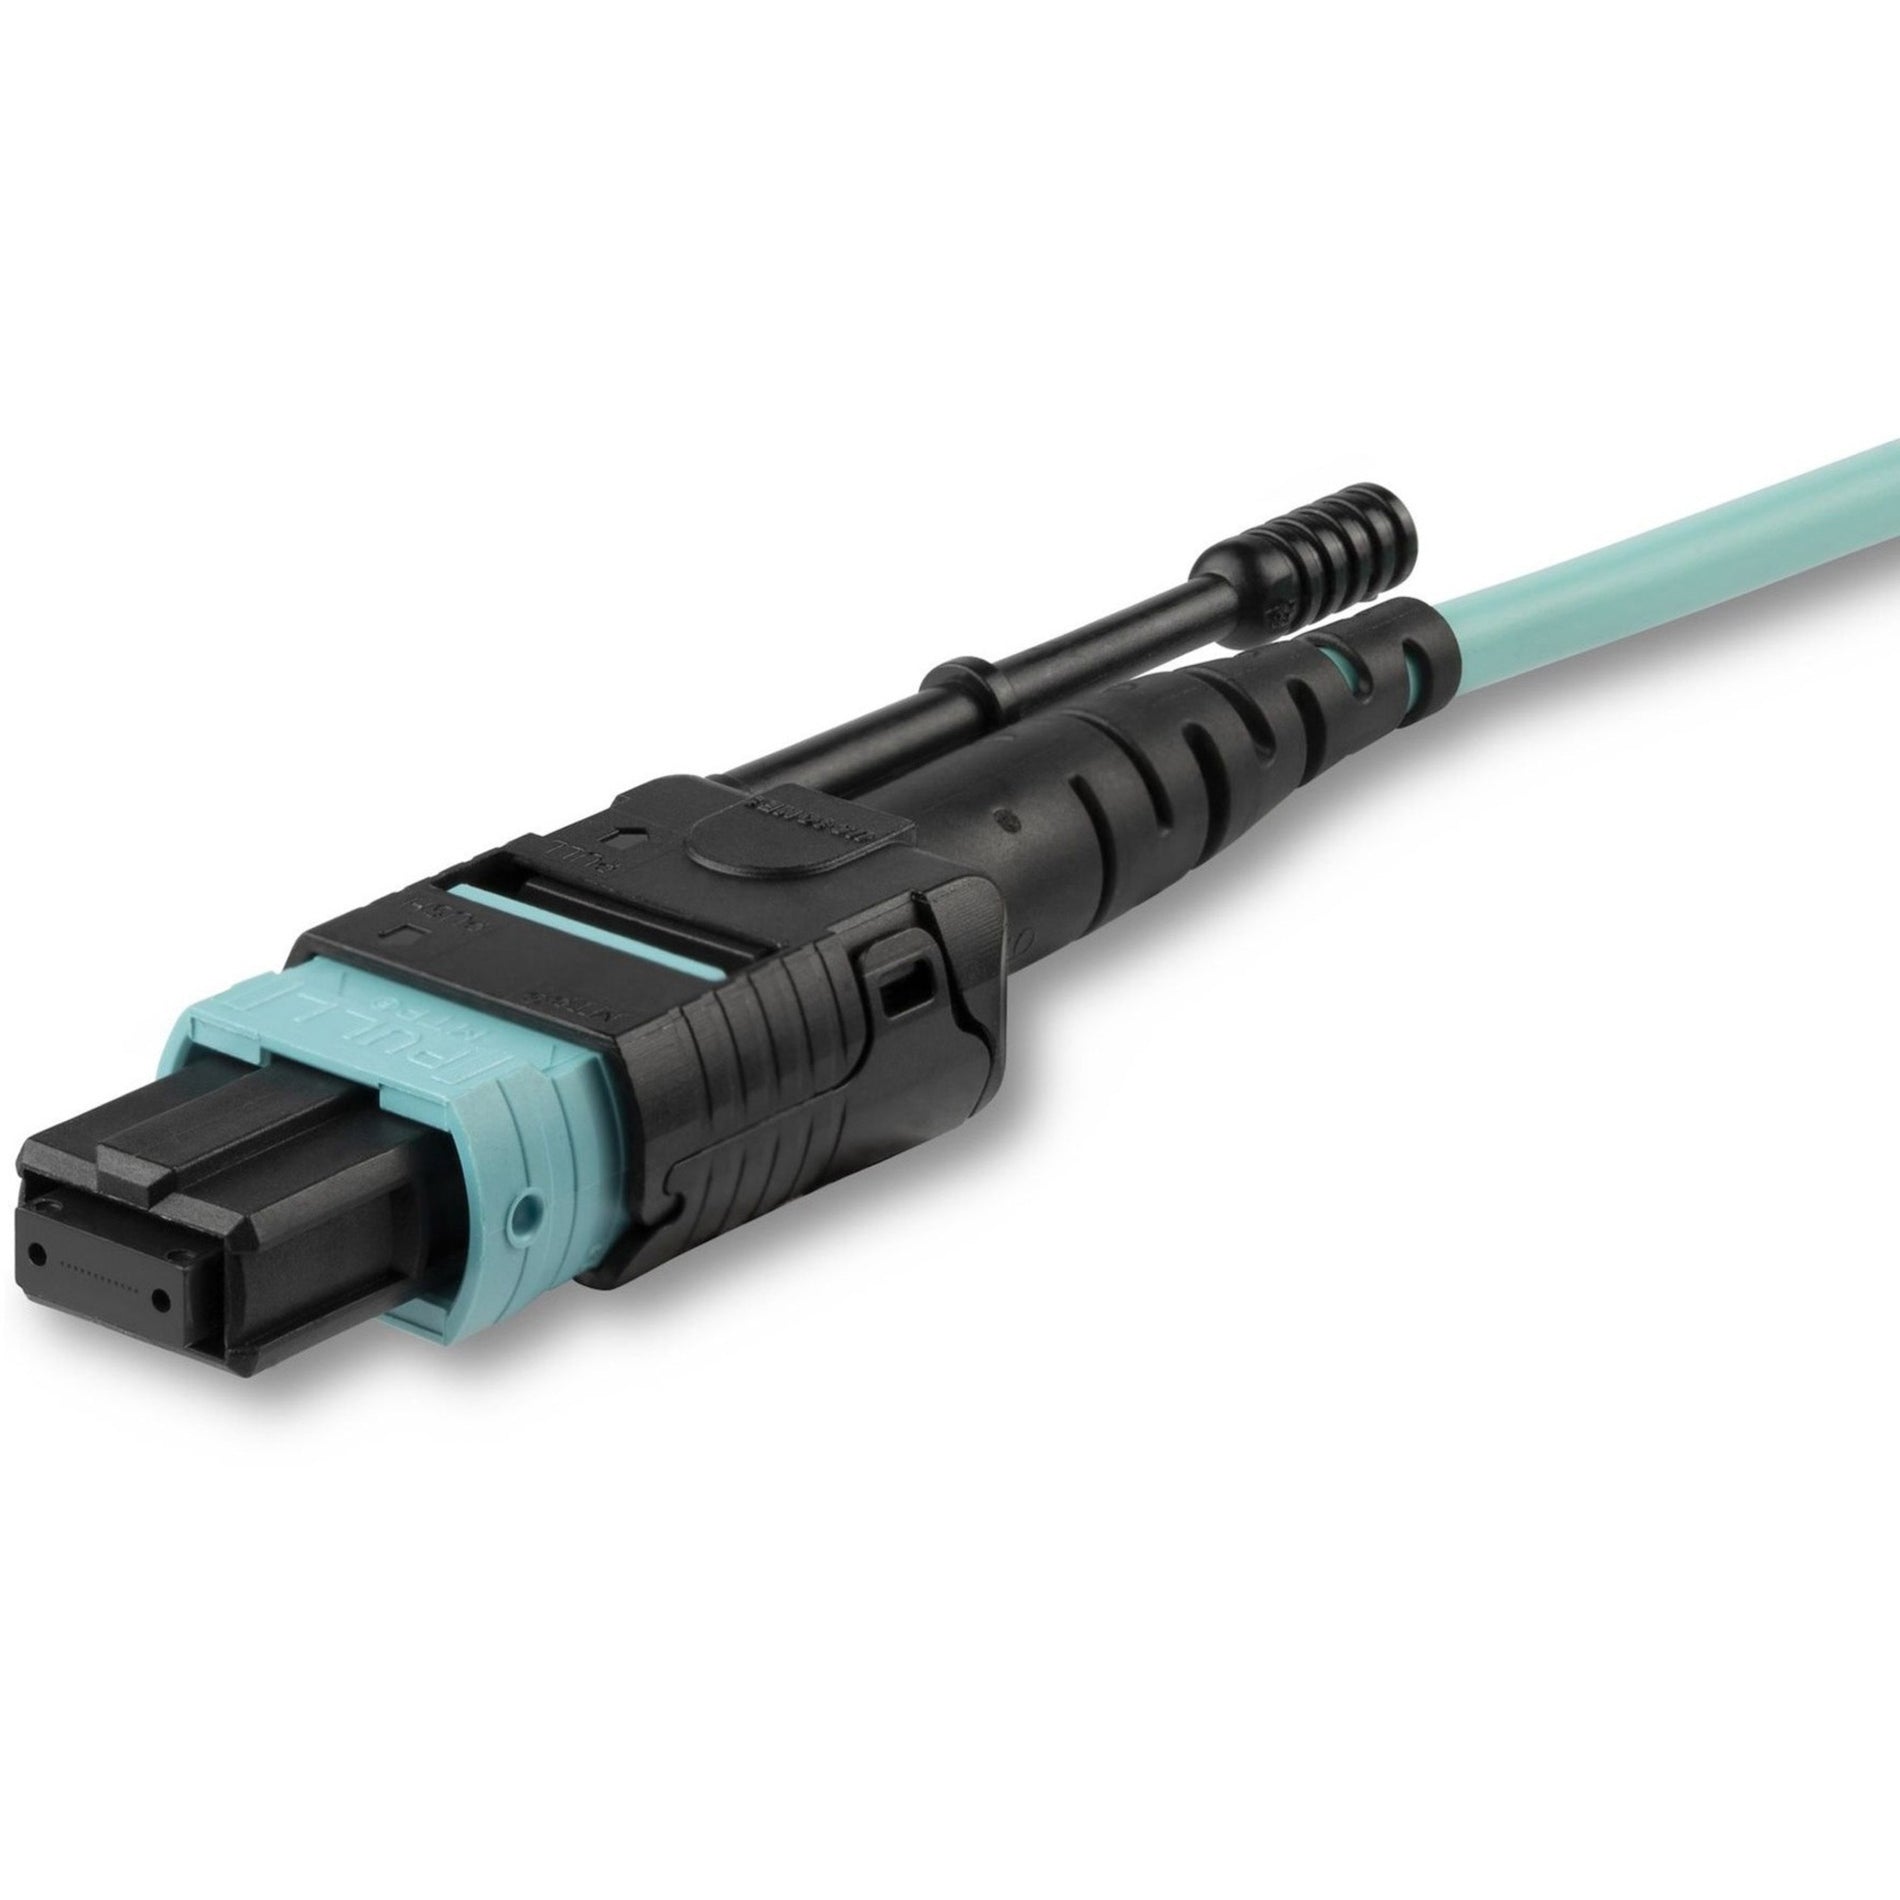 StarTech.com MPO12PL3M Fiber Optic Network Cable, 10 ft - Plenum-Rated MTP to MTP Cable, OM3, 40G MPO Cable